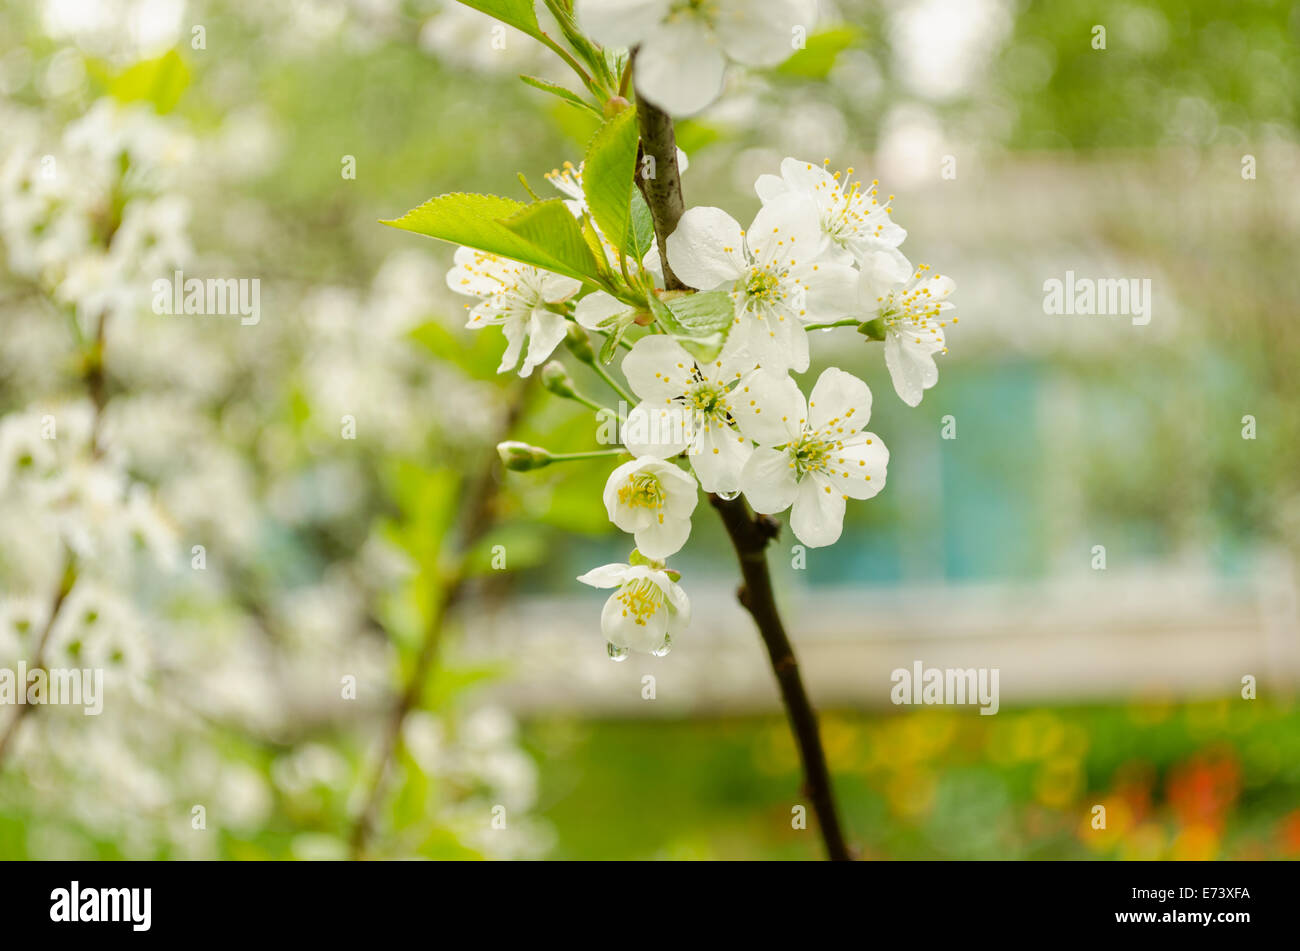 small apple tree branch with small white flowers and leaves with drops of rain Stock Photo